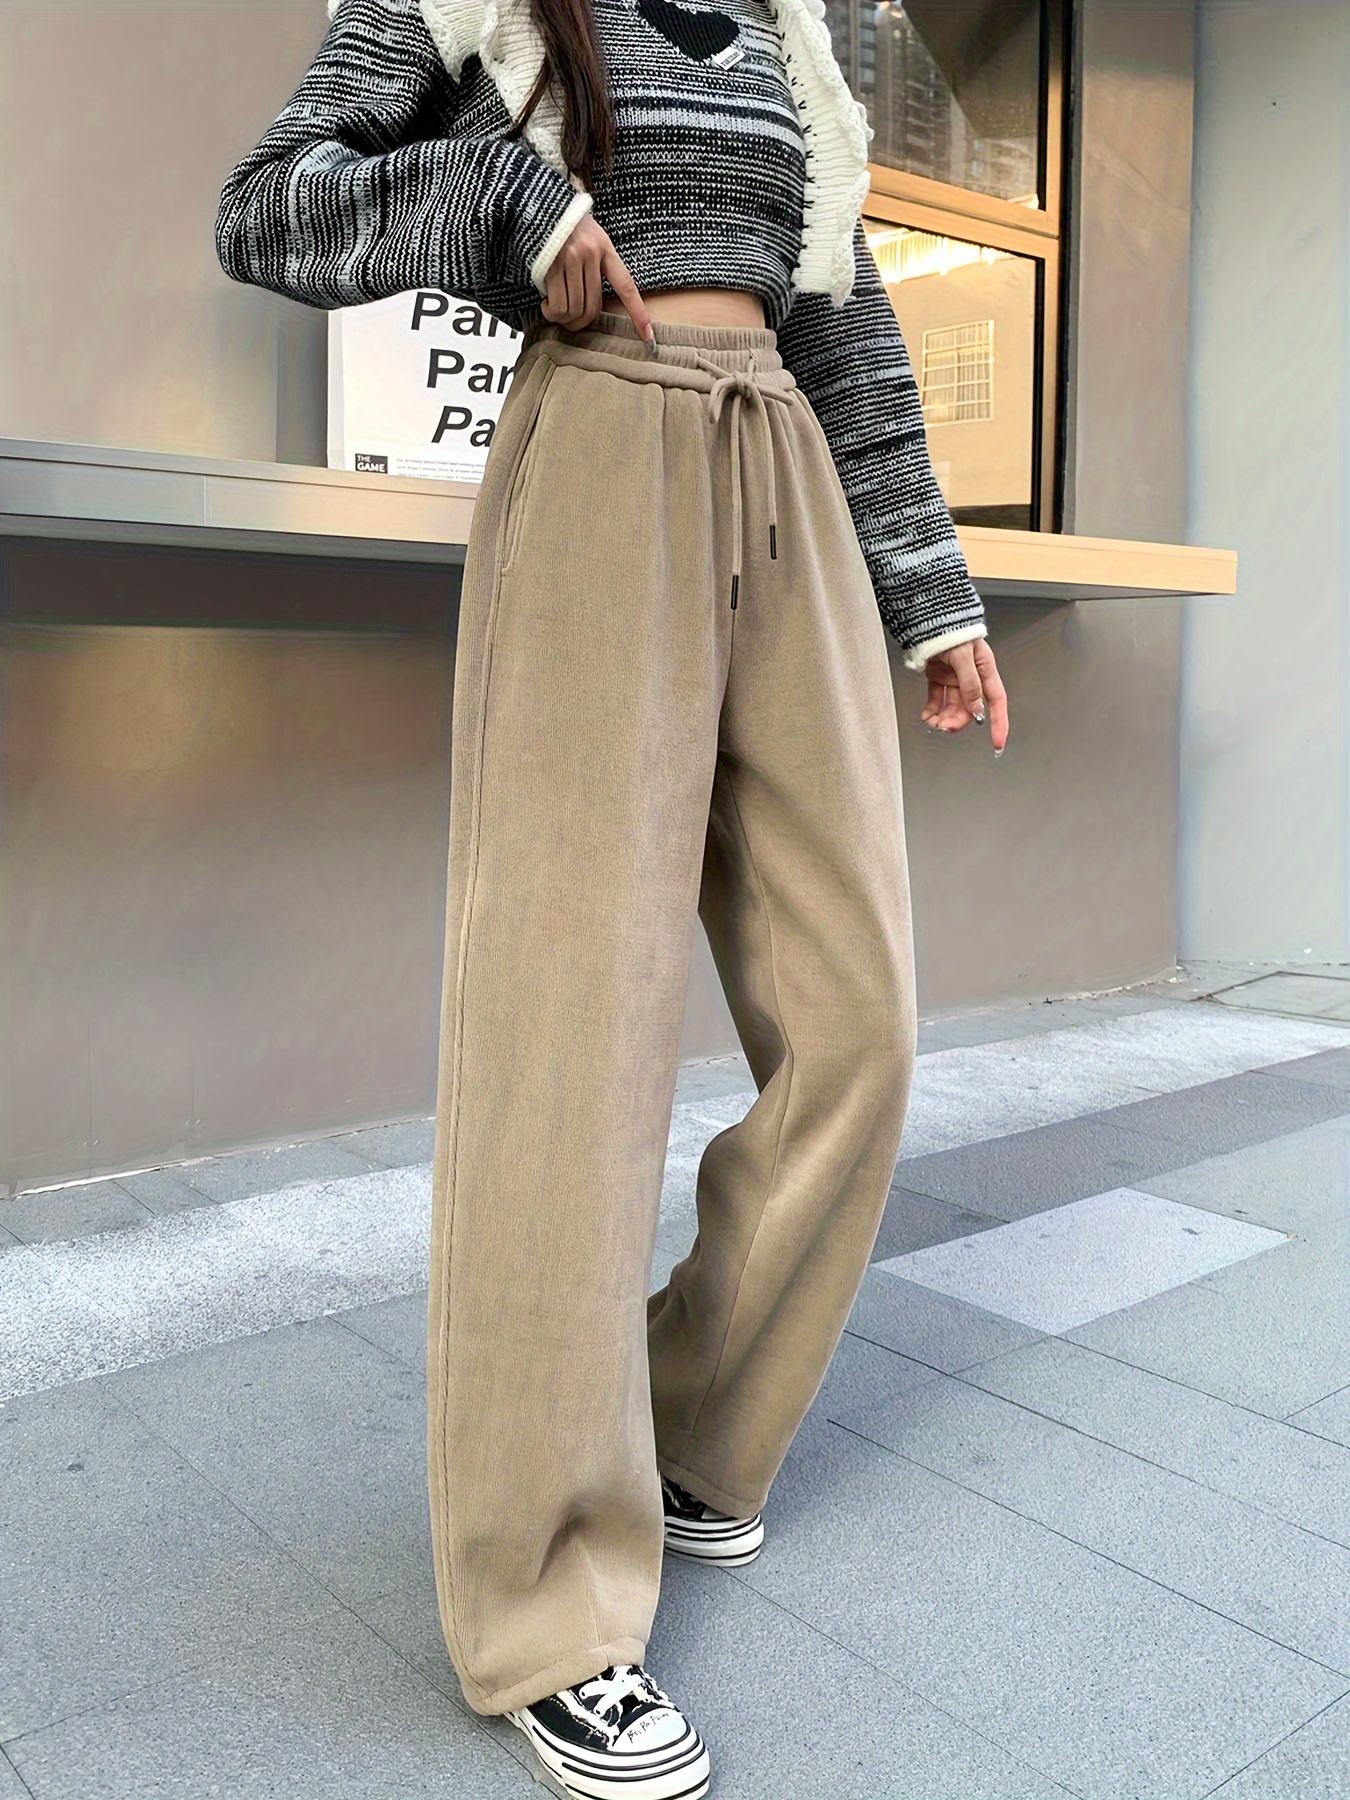 Drawstring Waist Straight Leg Trousers  Pants for women, Women pants  casual, Shopping outfit